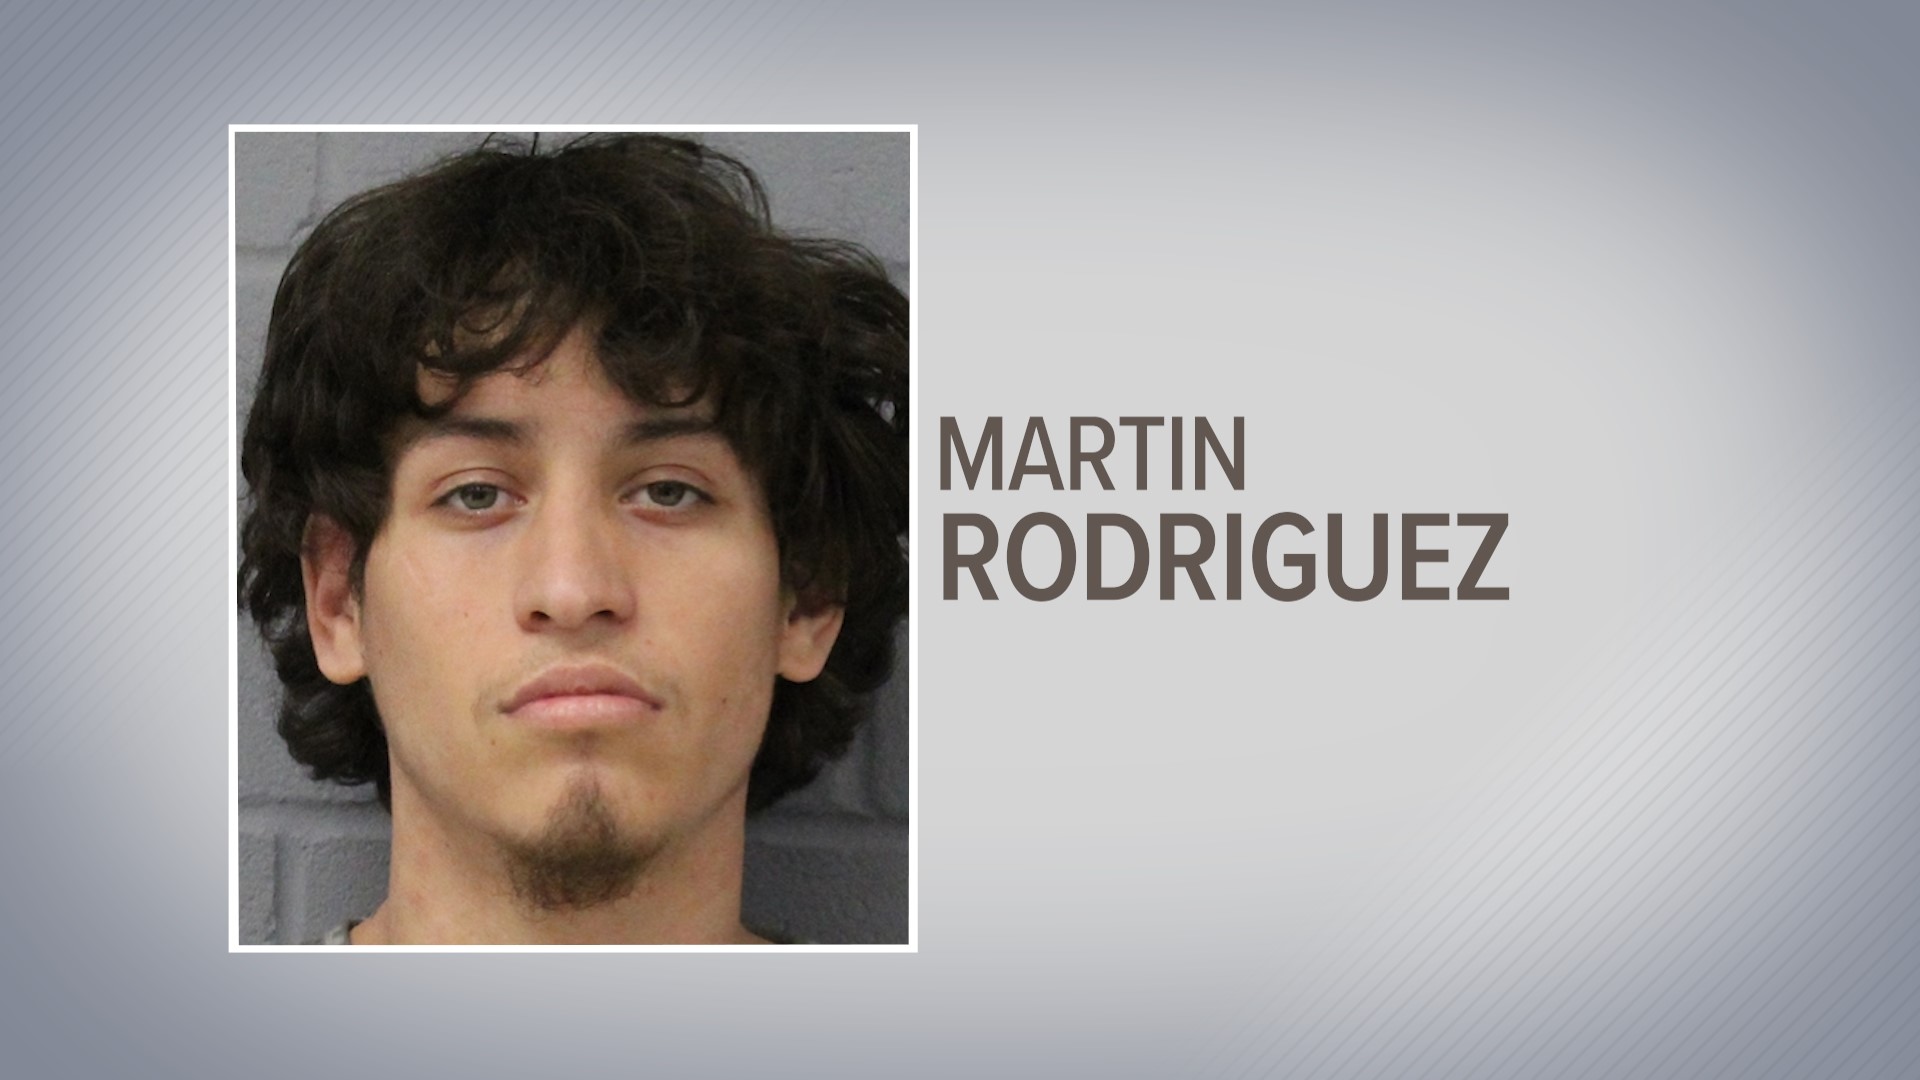 Austin police say Martin Rodriguez allegedly shot his girlfriend before turning the gun on himself.